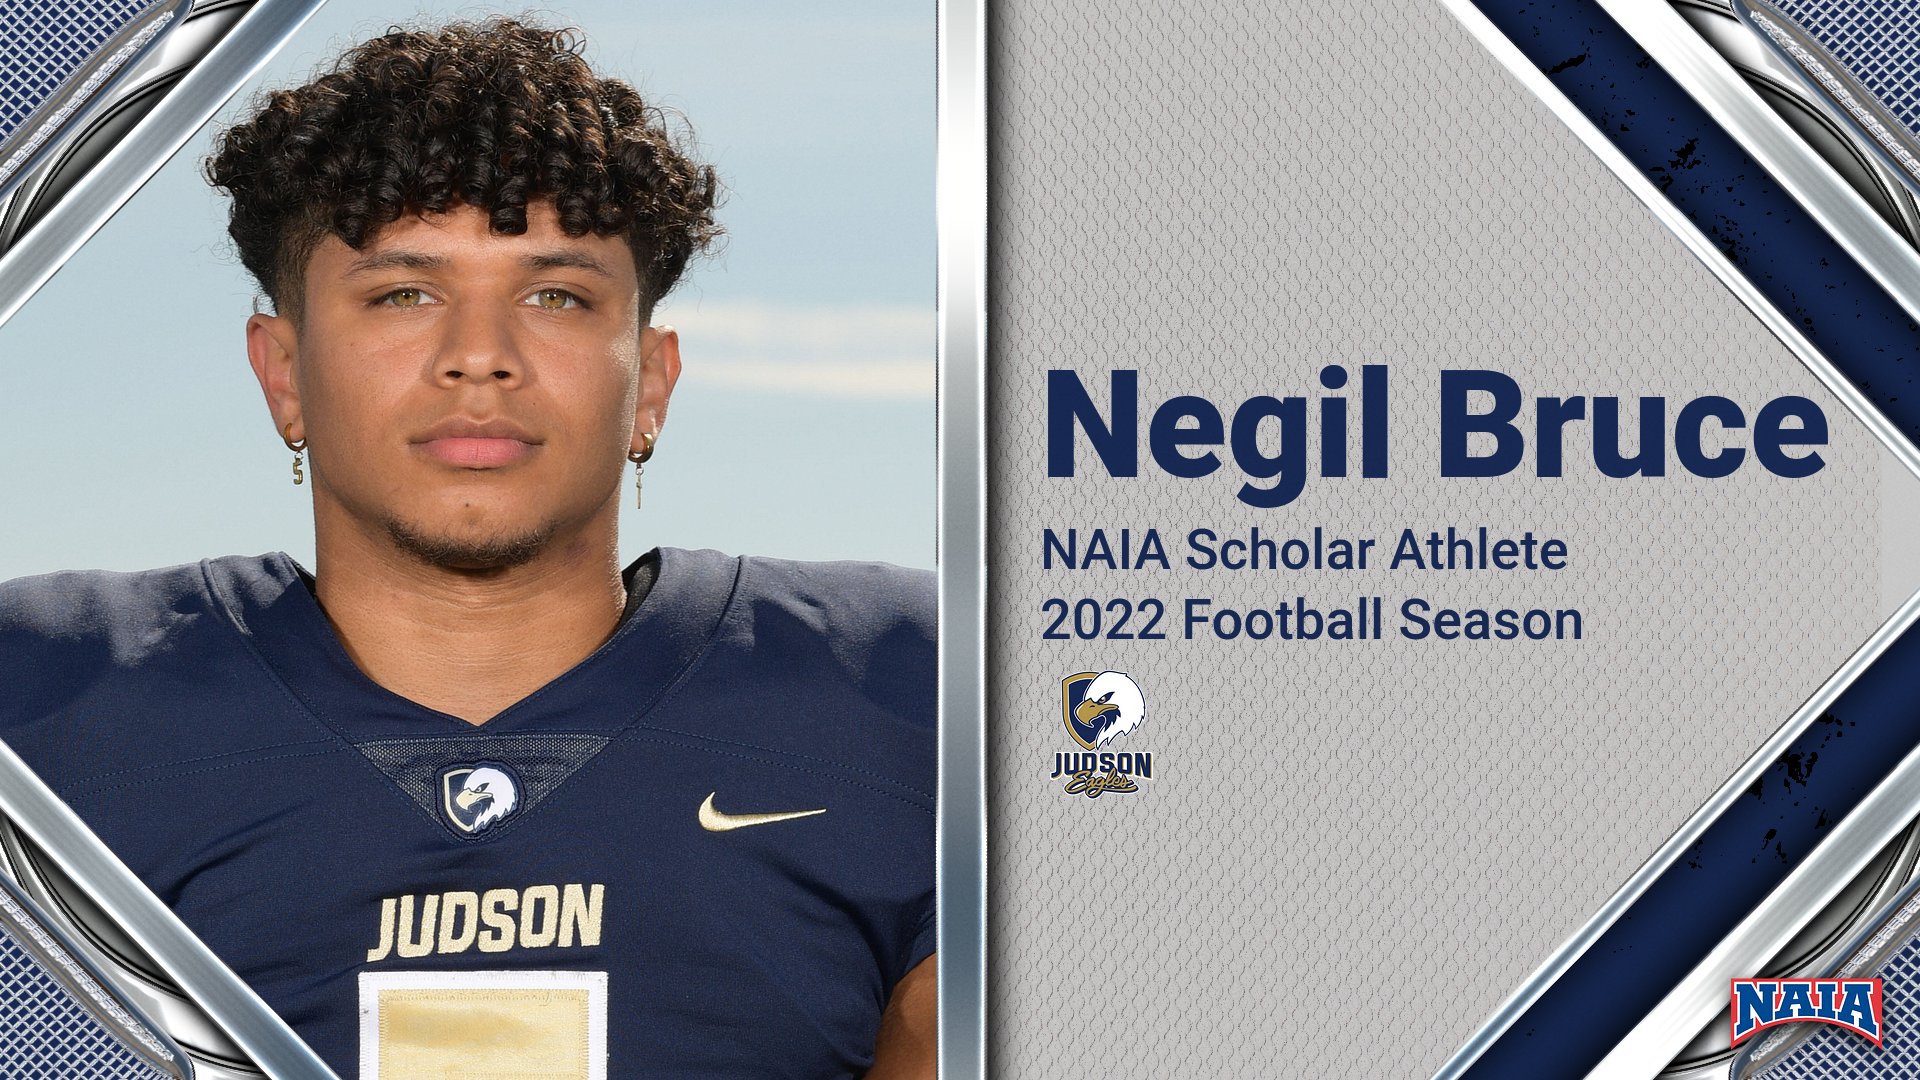 Negil Bruce Earns Second National Scholar Athlete Award with NAIA Honor